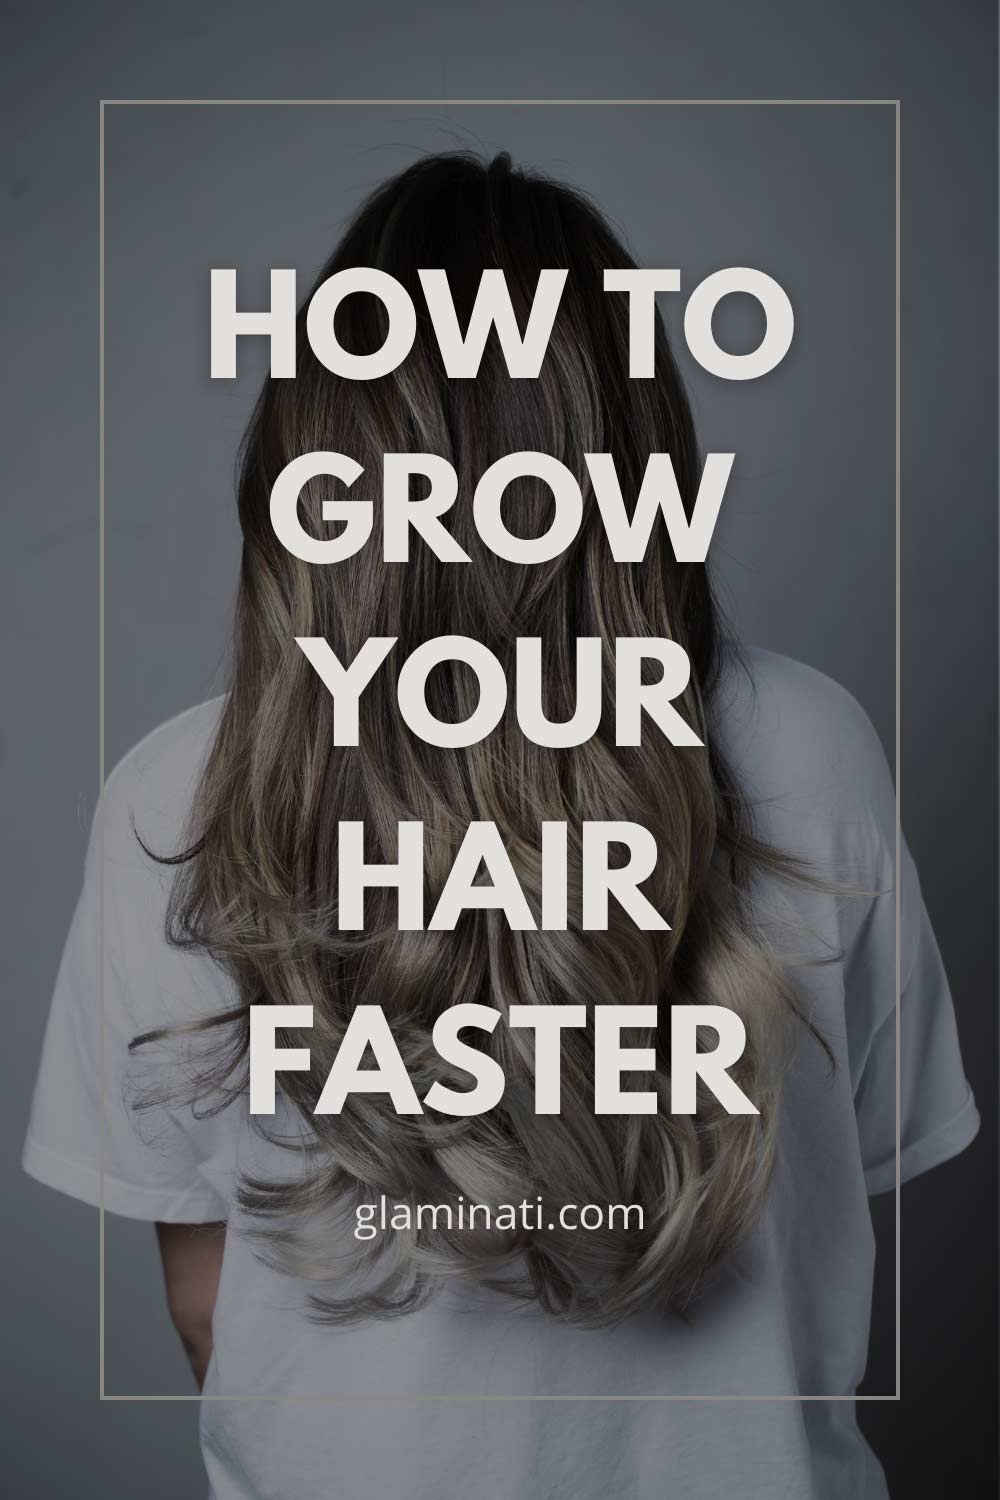 Maintain a Healthy Scalp to Grow Hair Faster